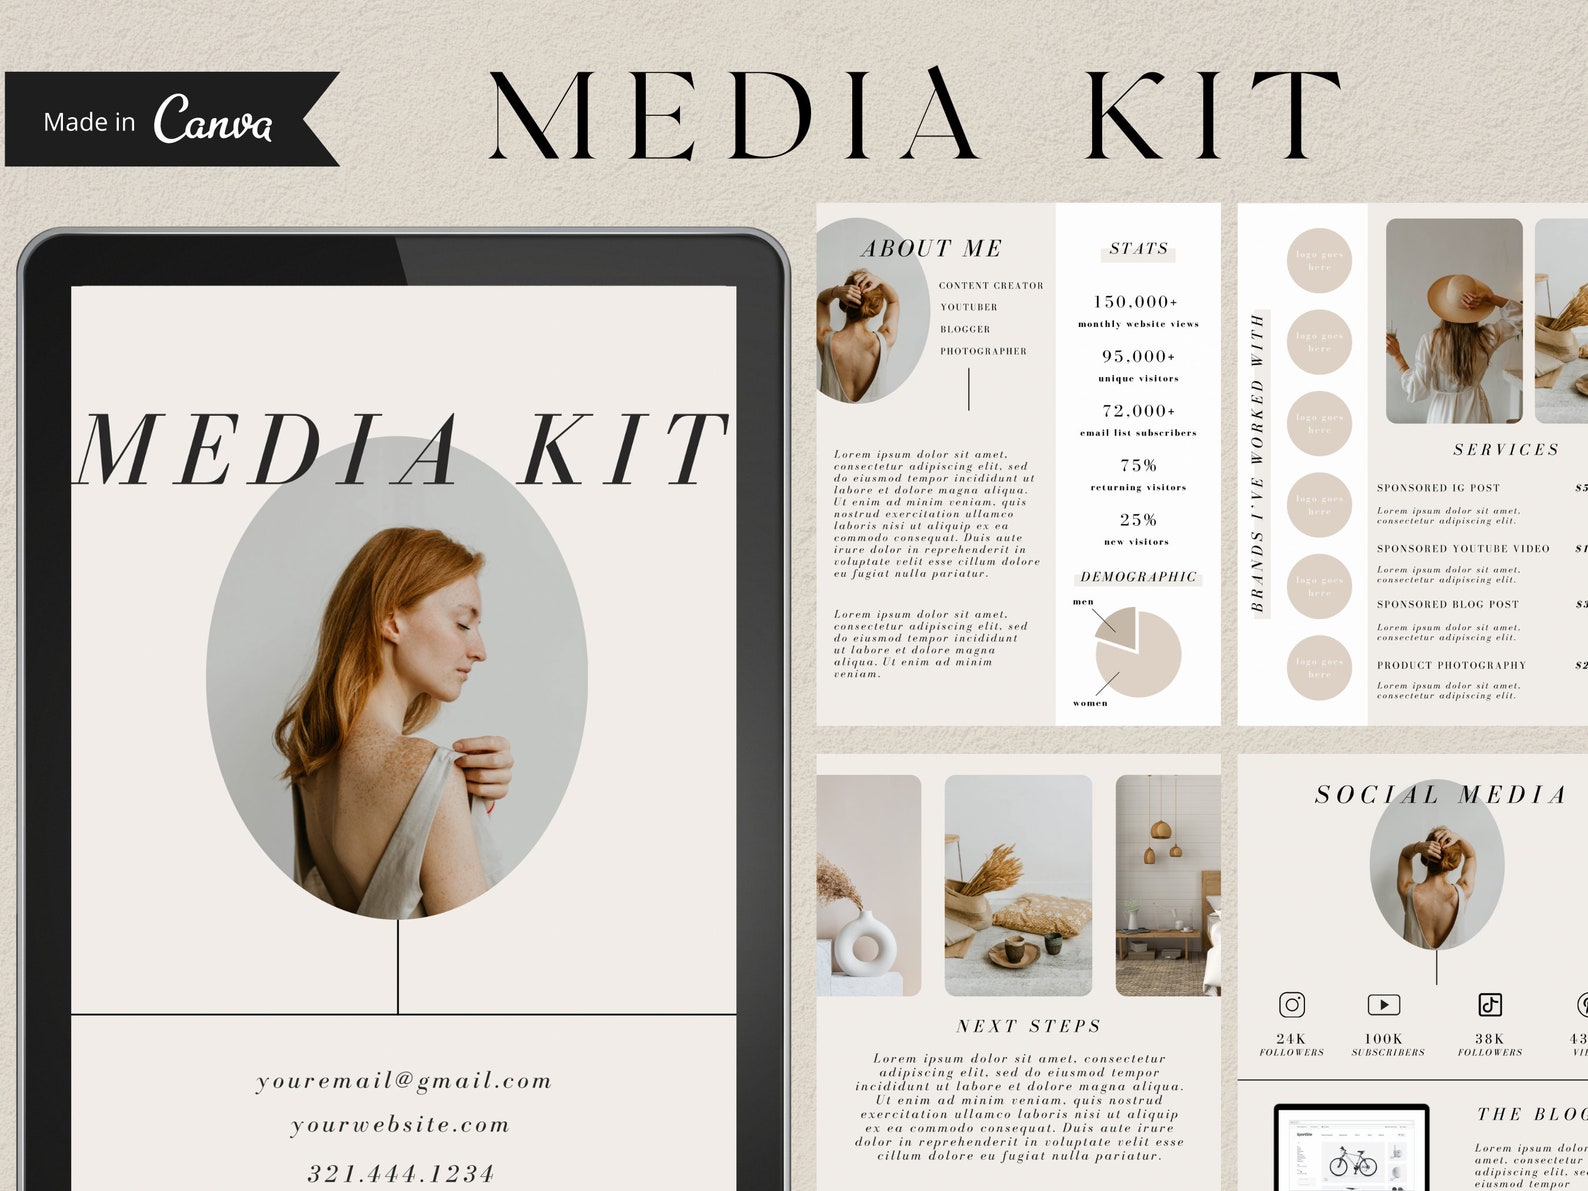 Apply for Collaborations with Brands Influencer Media Kit for Instagram & TikTok Customizable Canva Template Content Creator Brand Kit